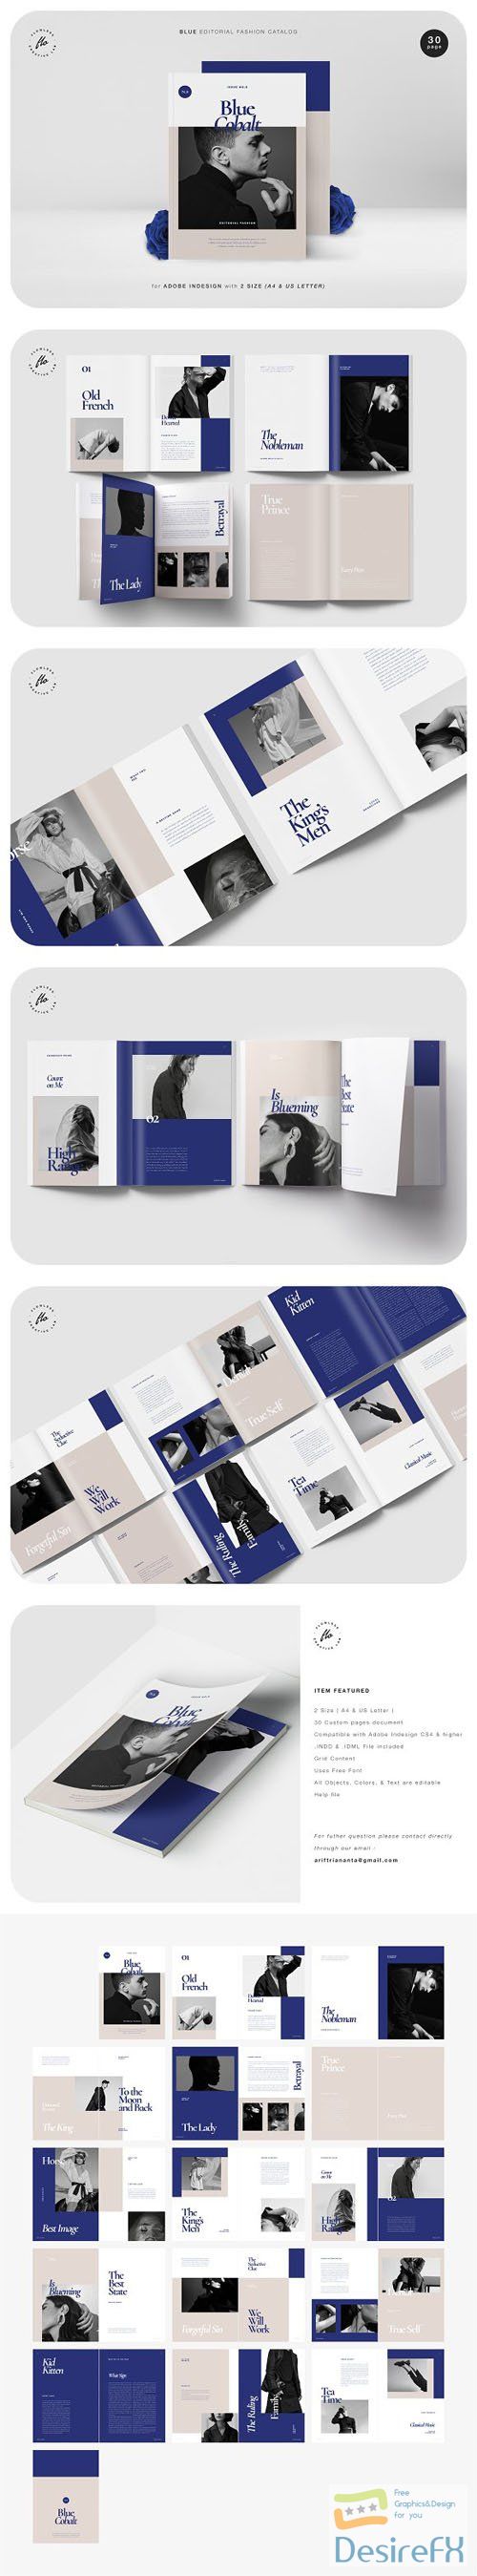 Blue Editorial Fashion Catalog Indesign INDD Templates A4/US Letter